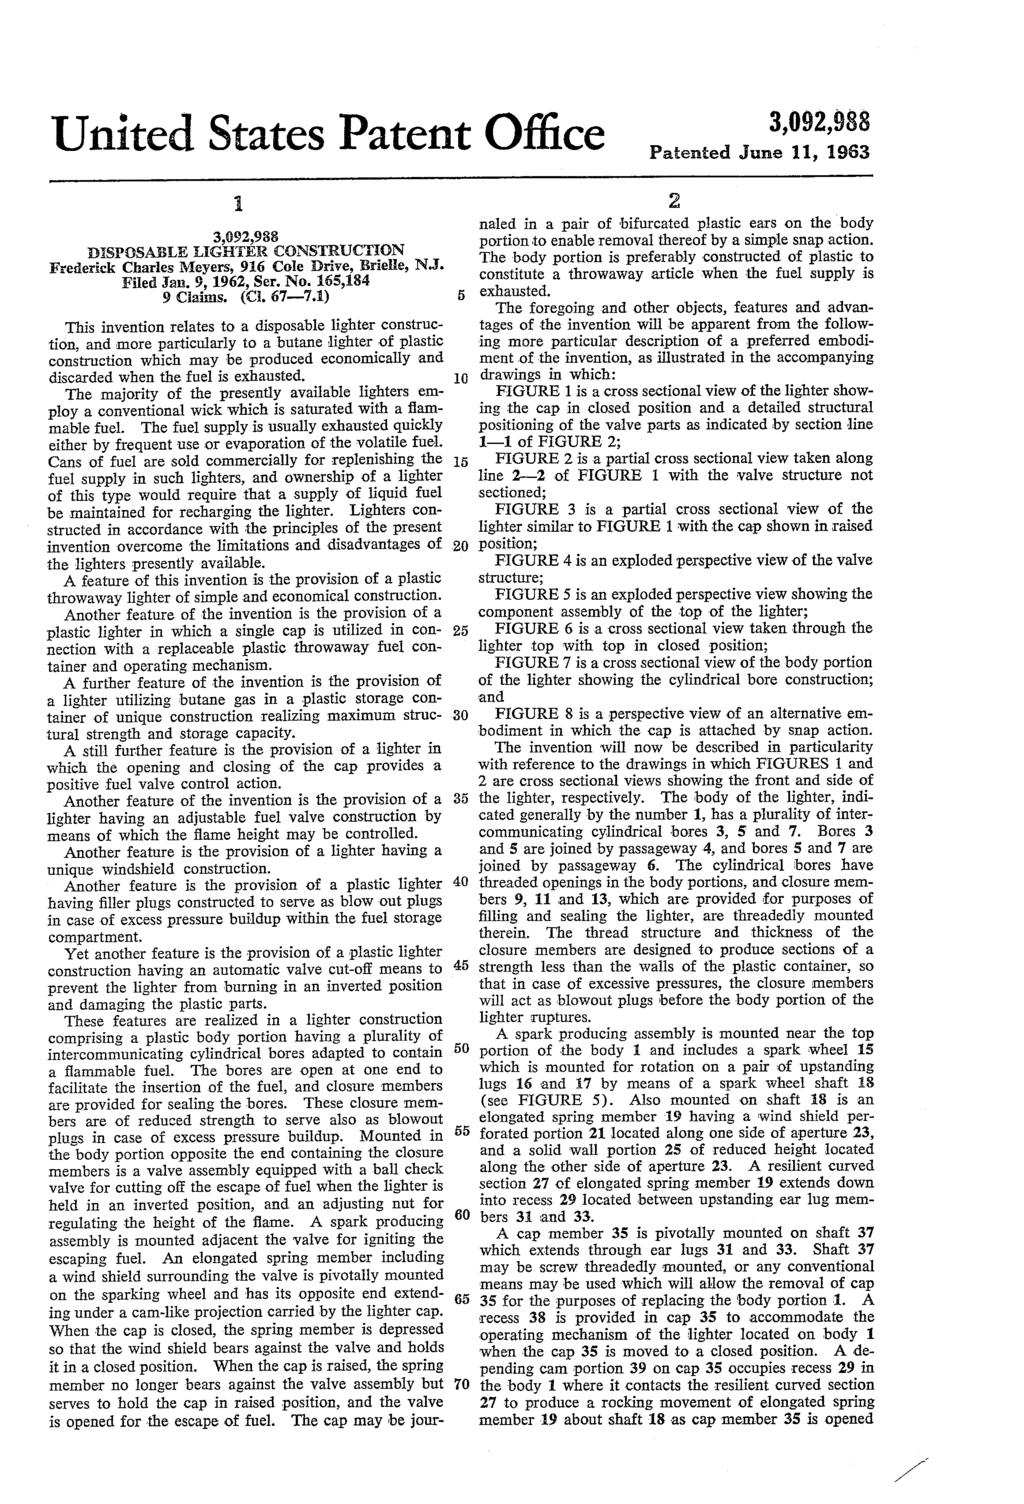 United States Patent Office Patented June 11, 1963 3,092.988 DISPOSABLE LIöffif construction Frederick Charles Meyers, 916 Cole Drive, Brielle, N.J. Filed Jan. 9, 1962, Ser. No. 16,184 9 Ciaims. (Cil.